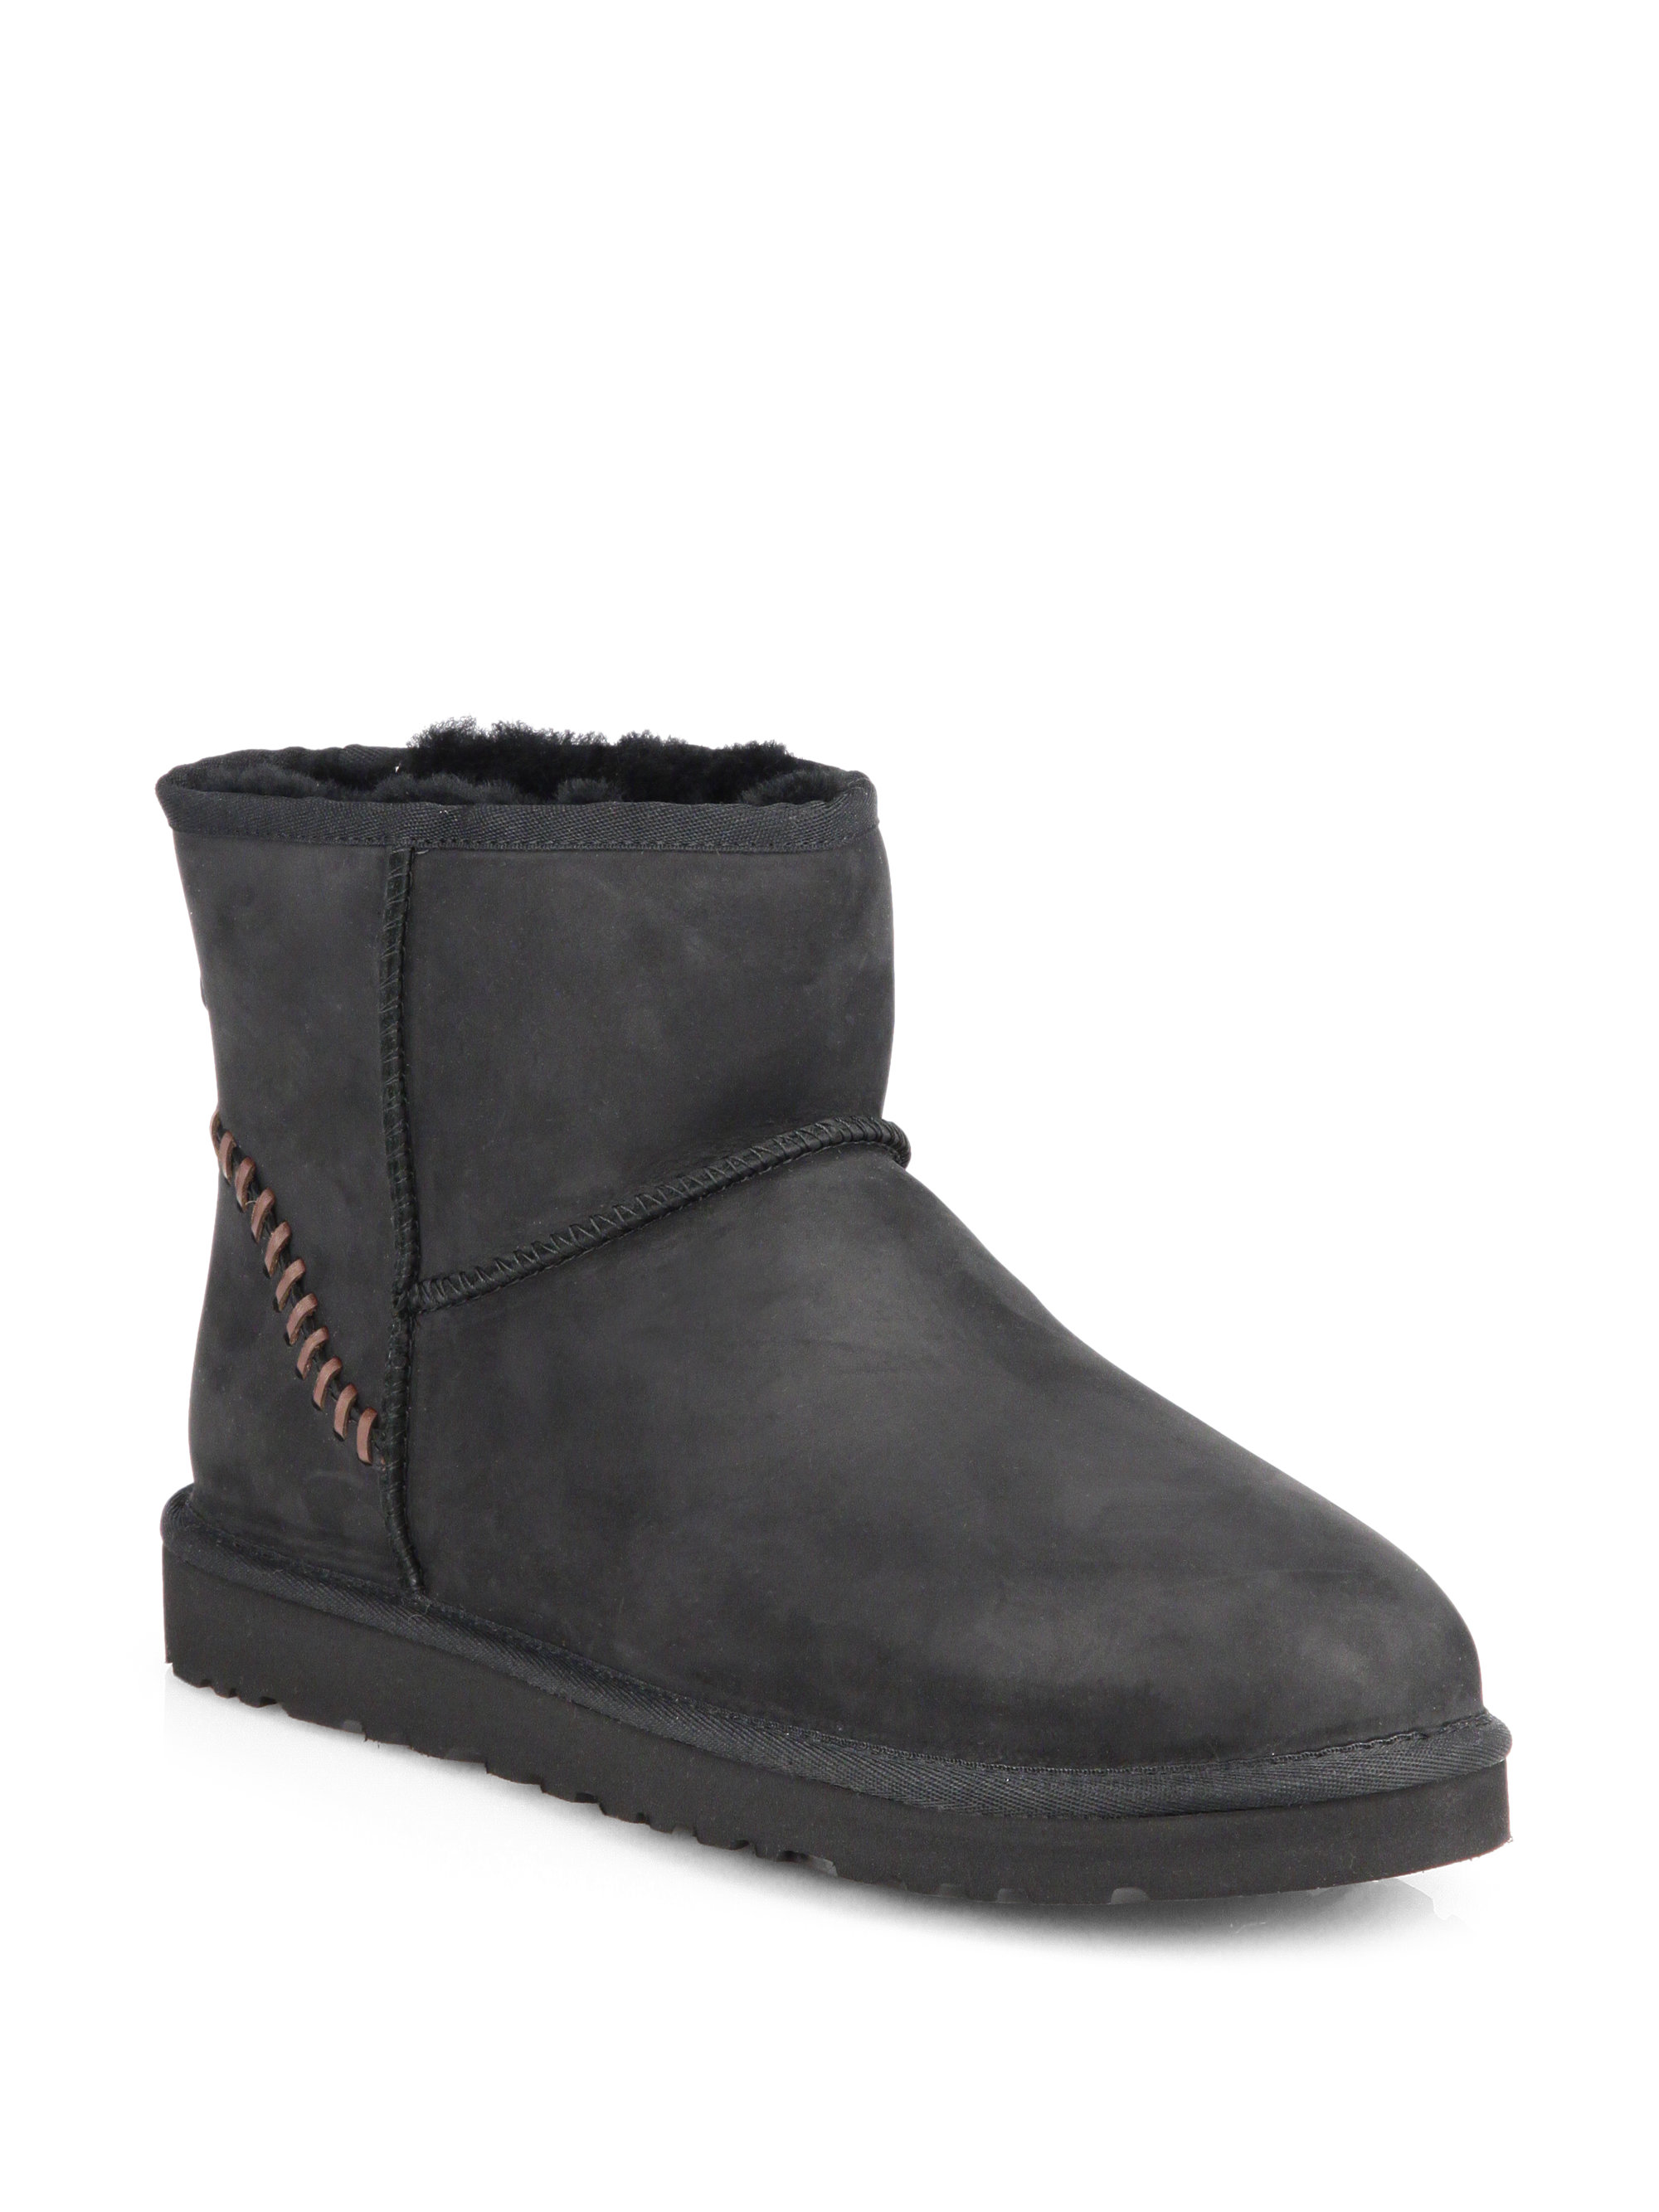 Ugg Classic Short Leather Boots in Black for Men | Lyst